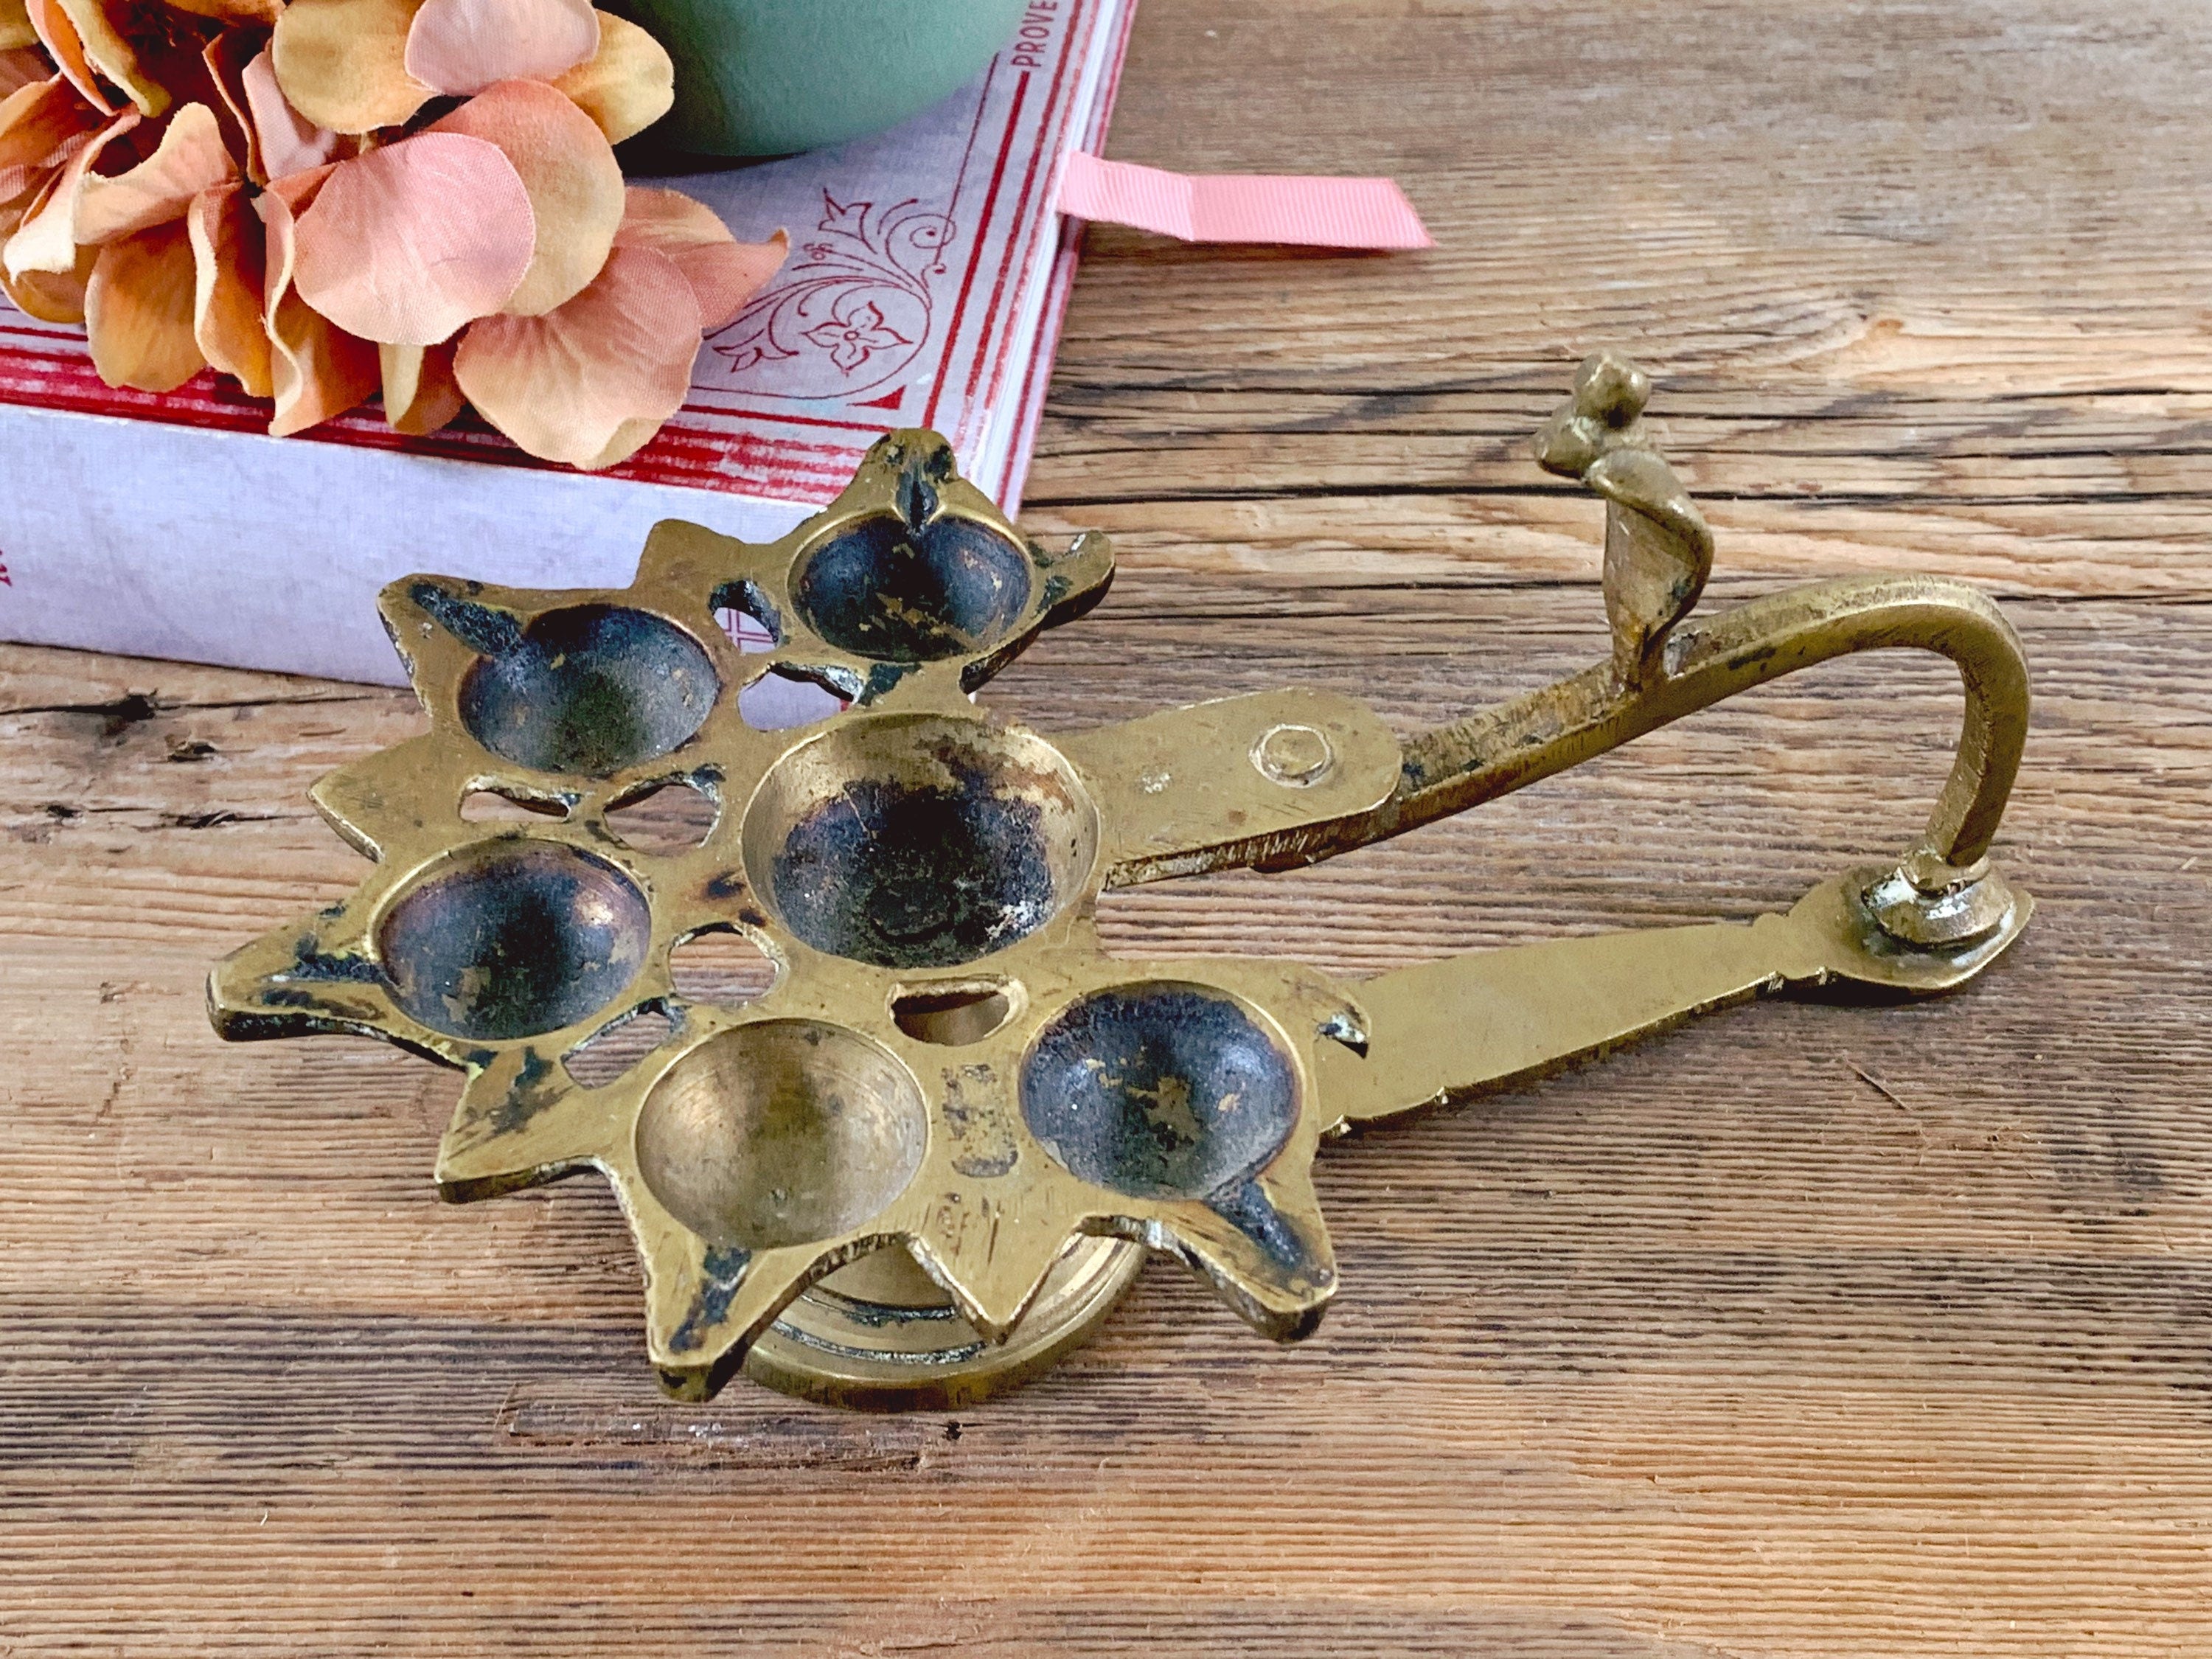 Antique Solid Brass Indian Handheld Oil Lamp | Old Snake Head Worship Lamp with Handle | Puja Diya Vintage Coffee Table Bookshelf Decor